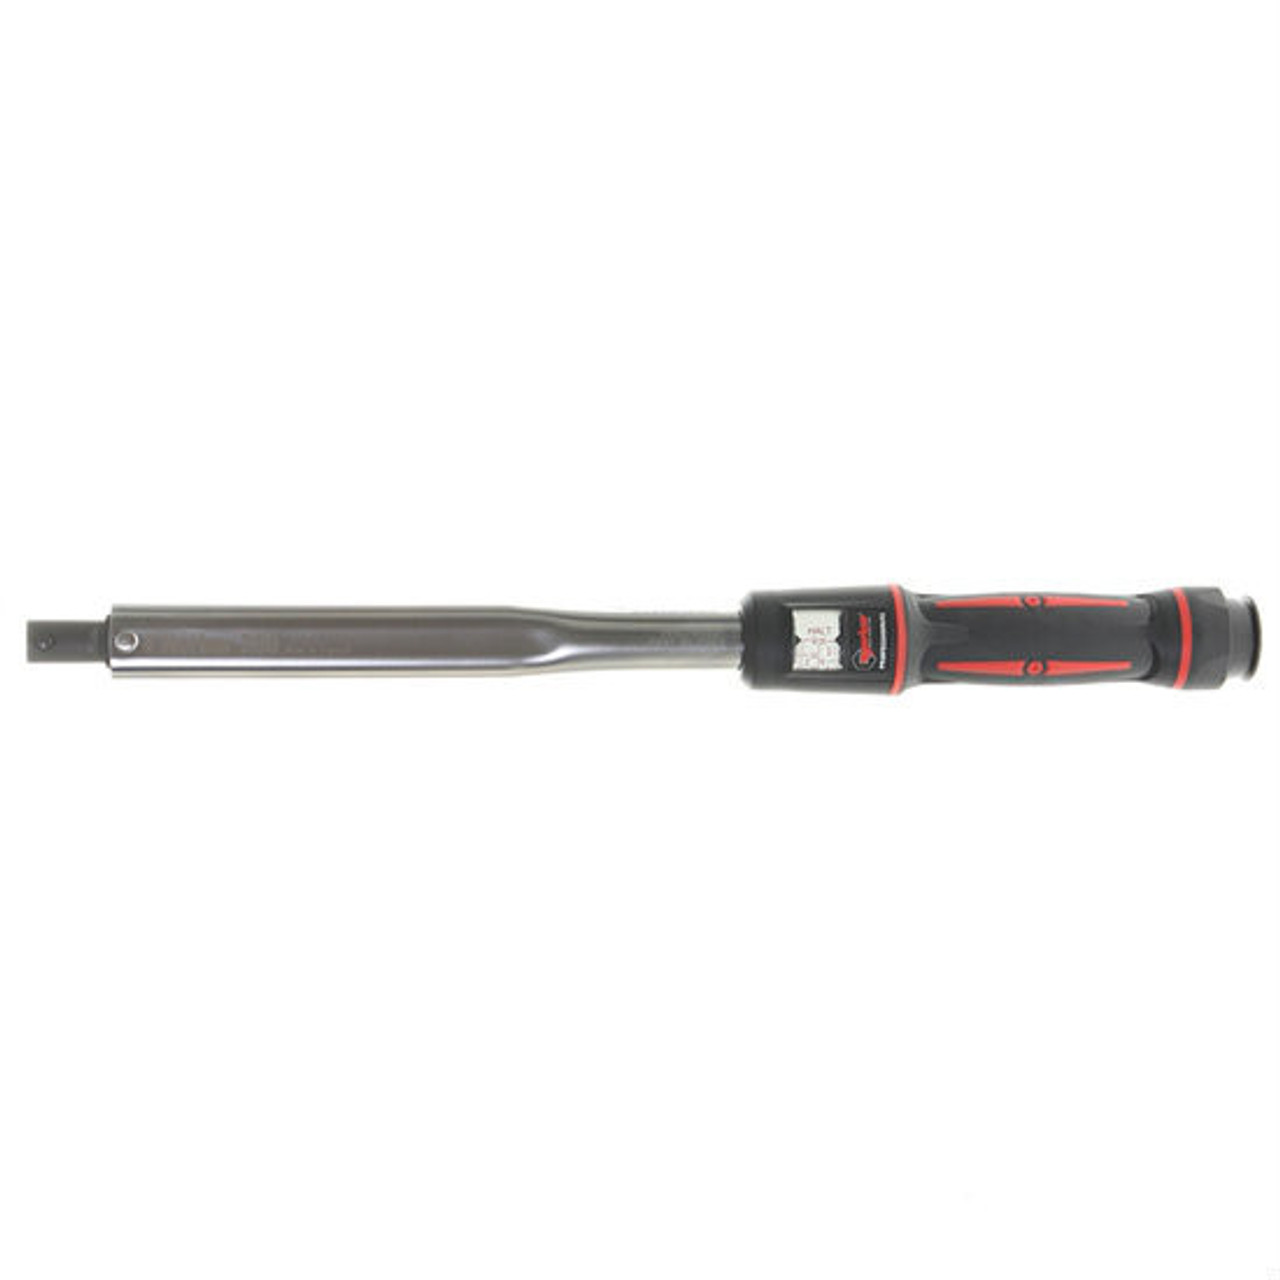 Norbar 44 - 222 Ft Lbs / 60 - 300 Nm Norbar 16mm Adj Changeable Head Torque Wrench - 15065